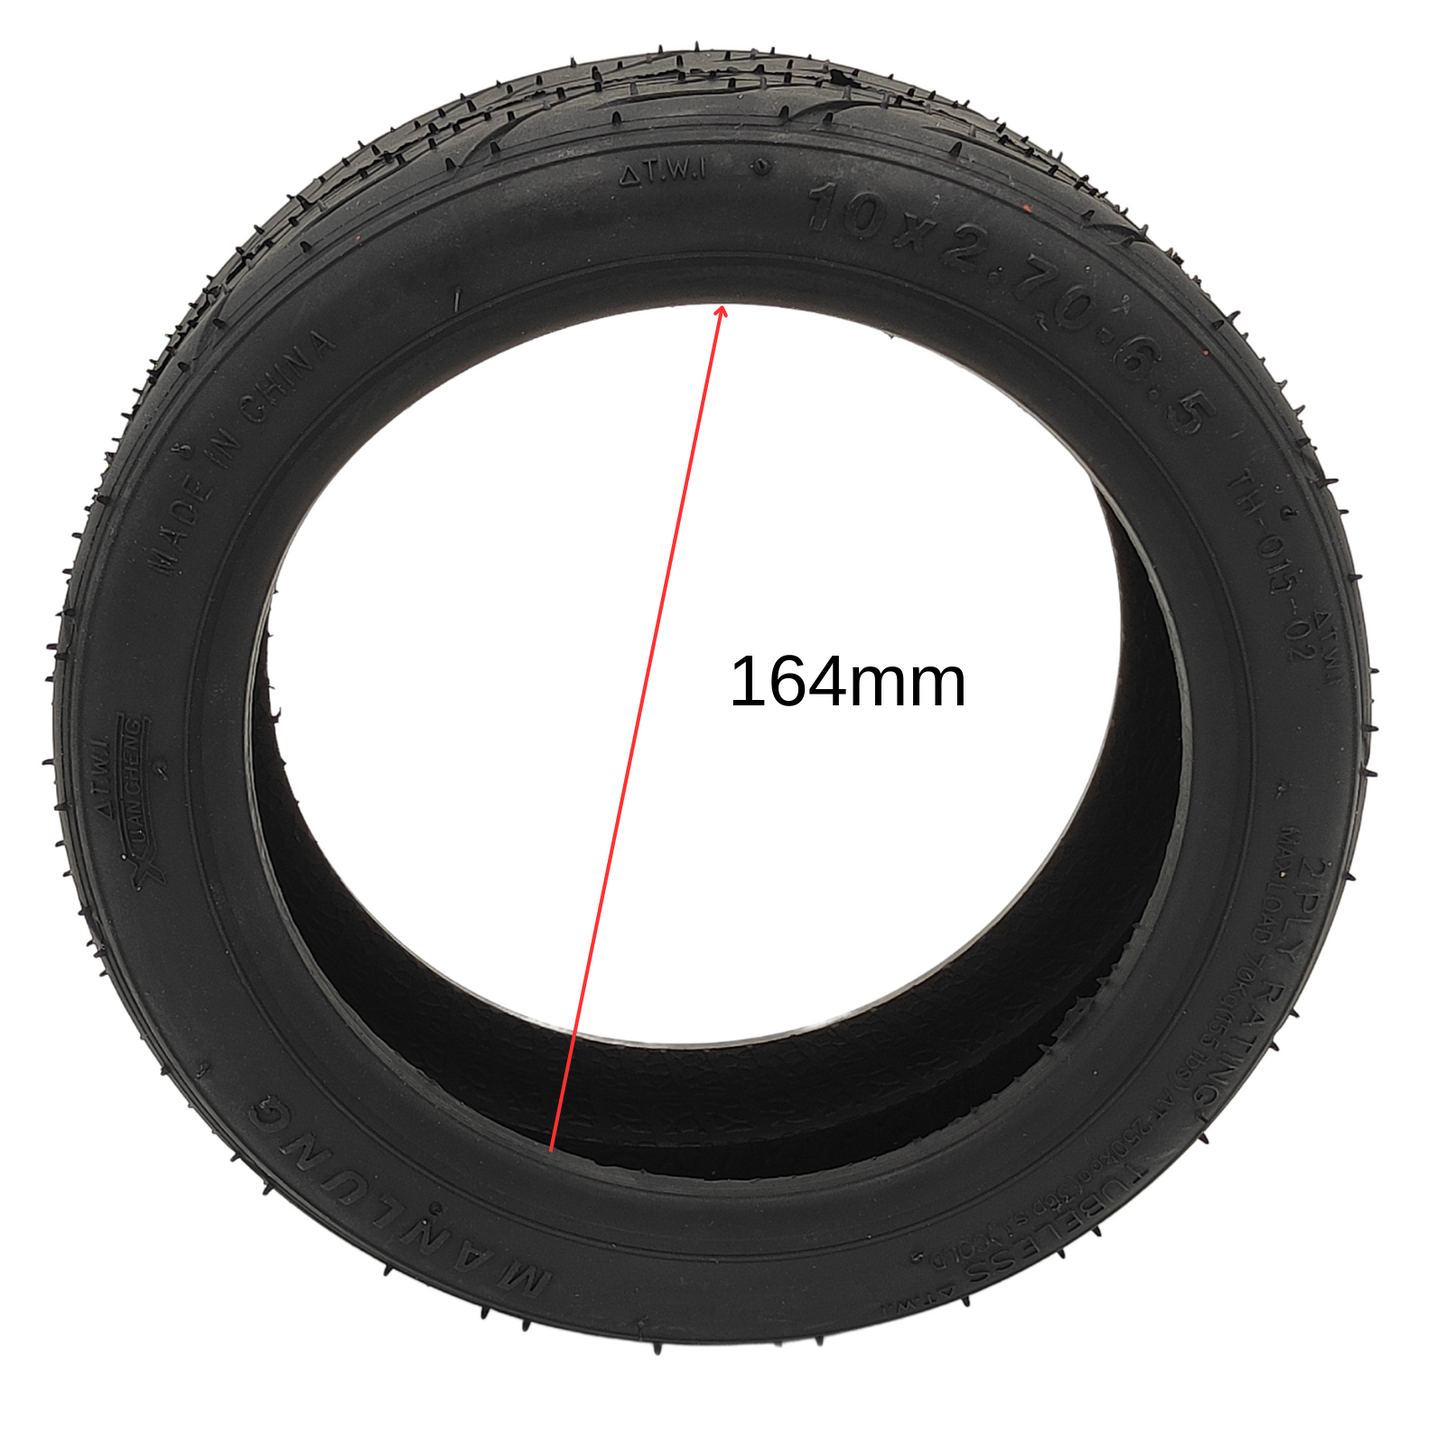 Xuancheng 10x2.7-6.5 tubeless tire with gel layer with valve